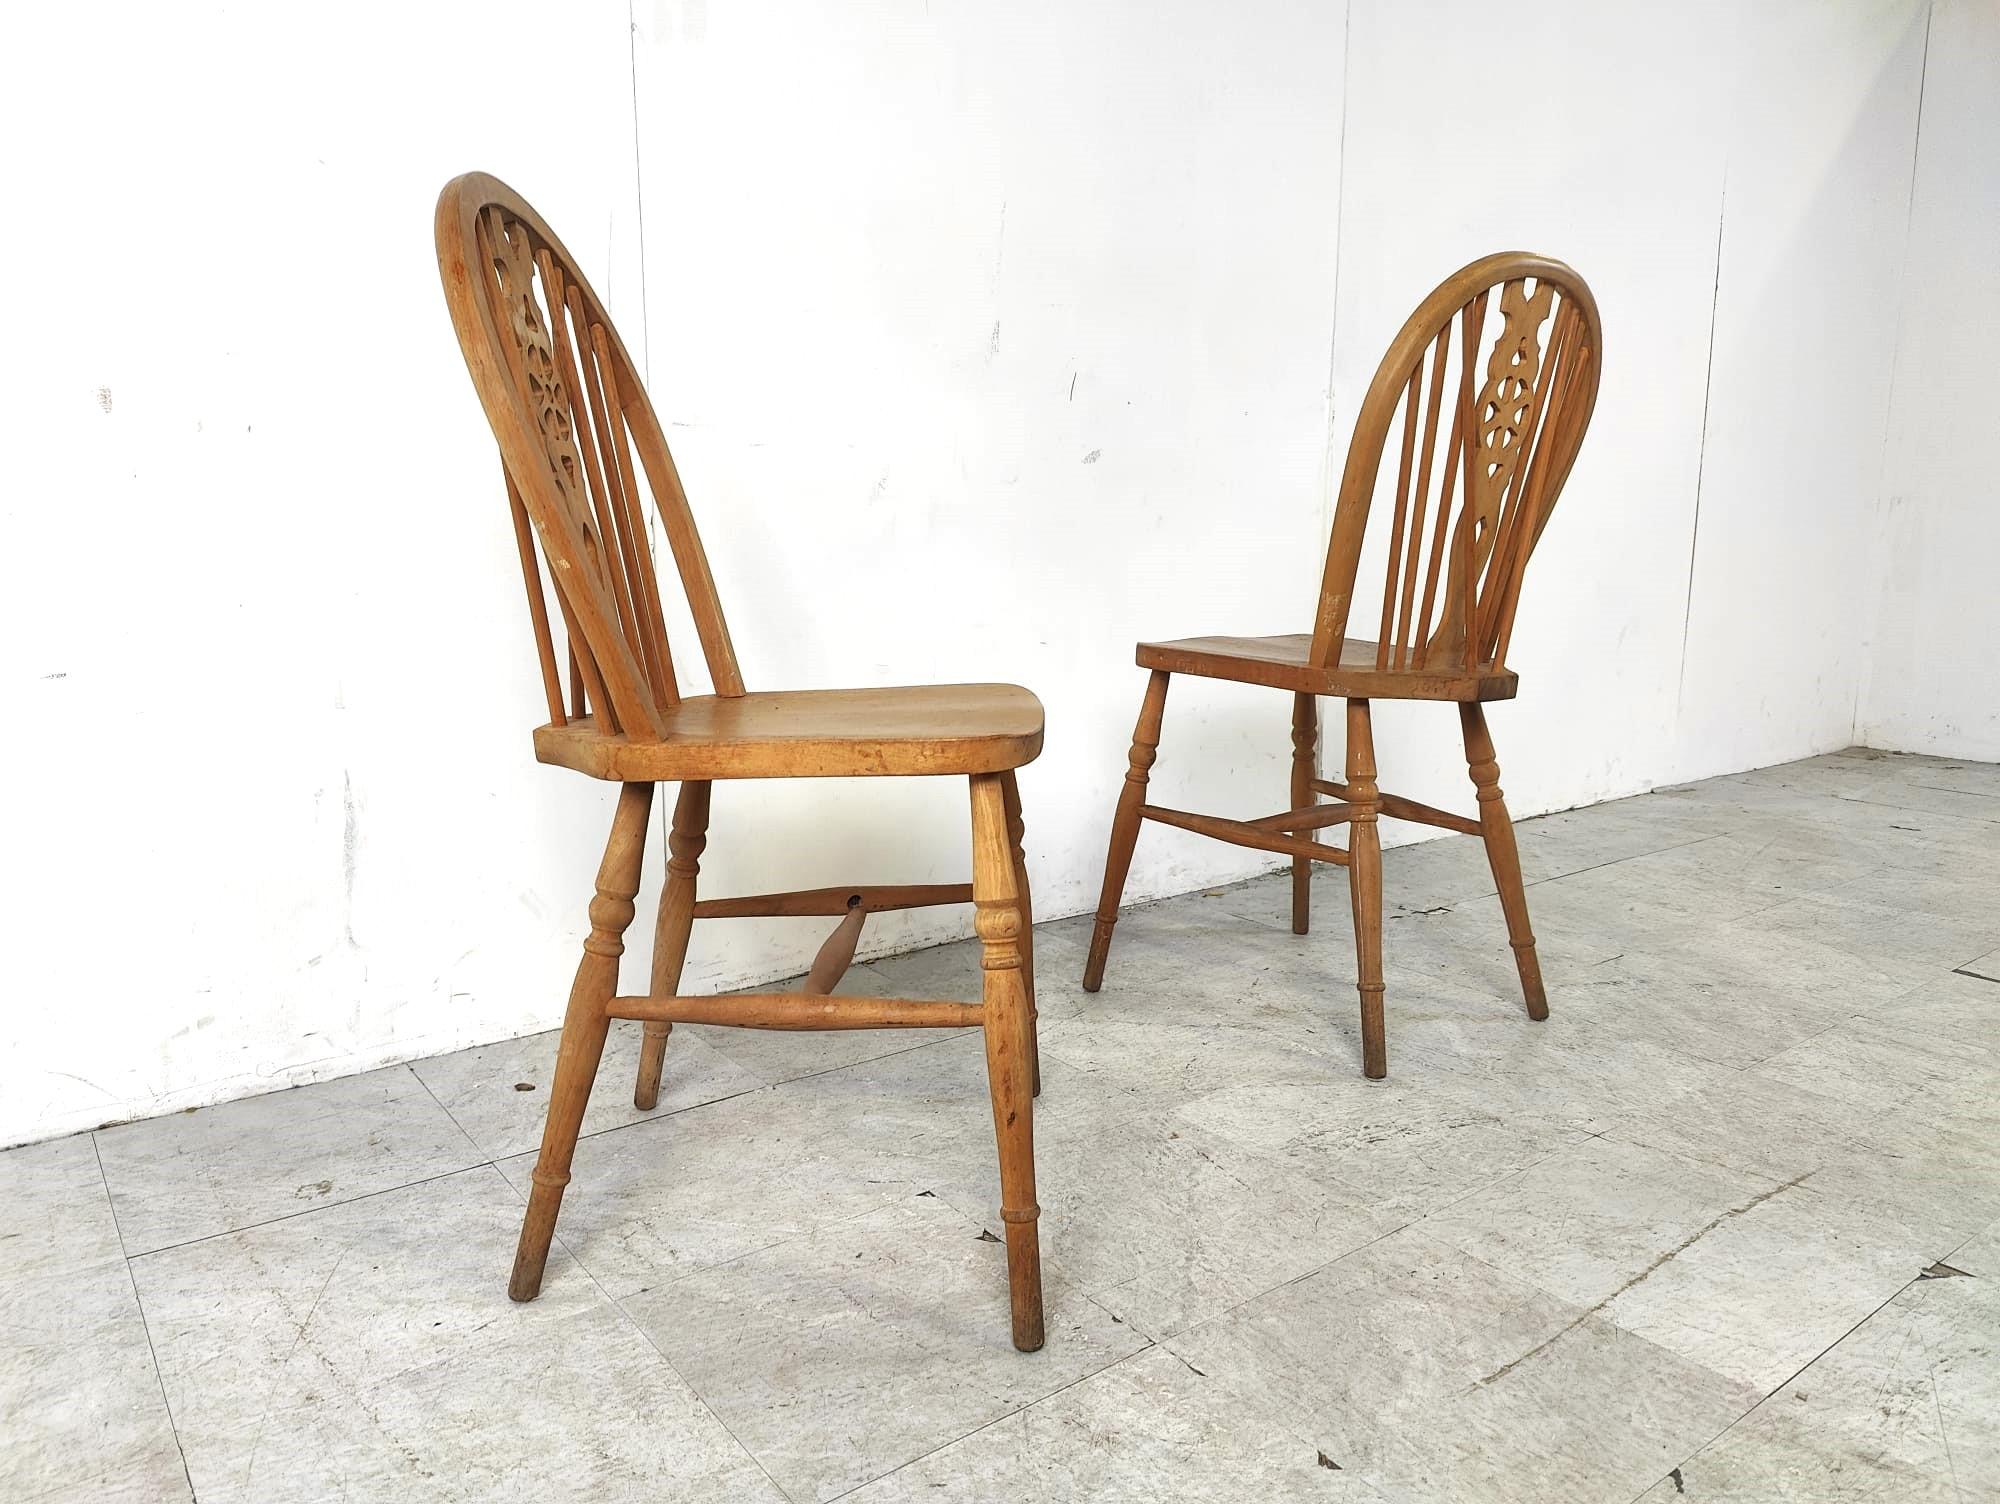 Set of 8 spindle back ercol dining chairs.

The chairs are beautifully crafted with an eye for details and are made of beech and elm wood.

Timeless pieces that gives an antique/vintage touch to your interior which mixes well with modern day